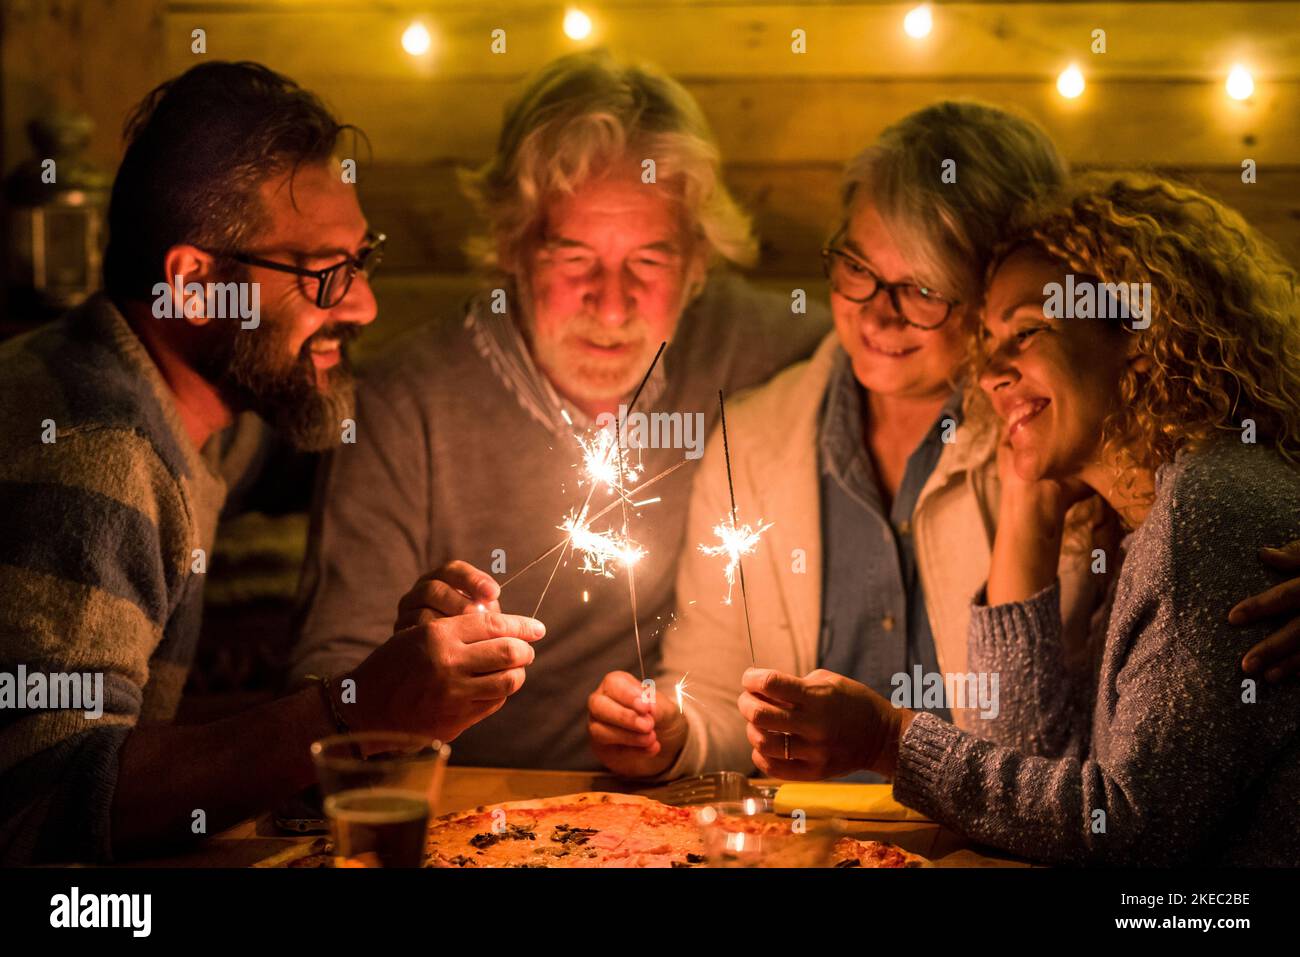 group of people celebrating the 2021 new year after a hard 2020 - bye 2020 concept - family enjoying and having fun together with sparklers at home eating pizza at dinner - christimas concept Stock Photo